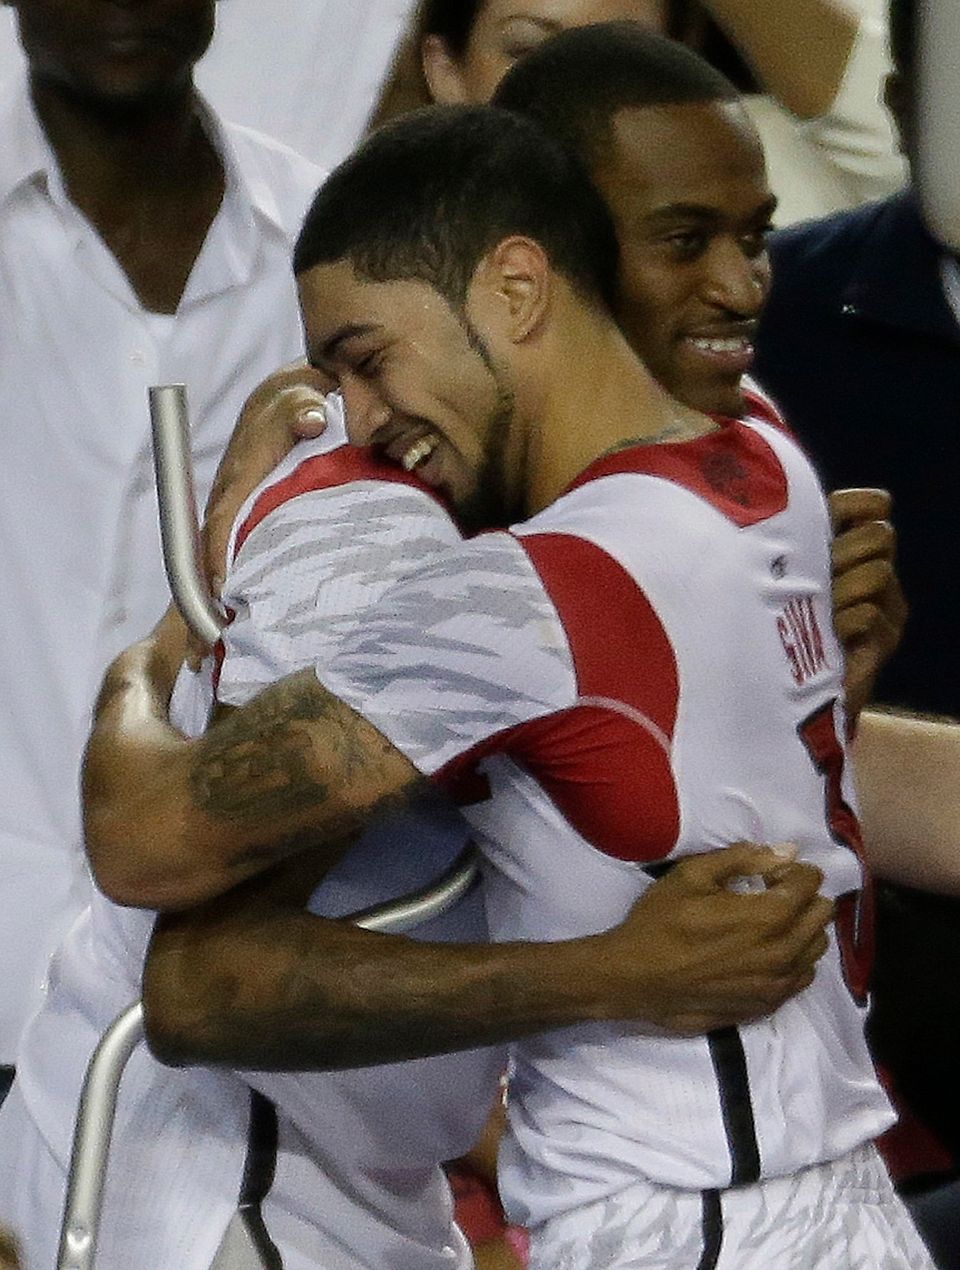 Peyton Siva to Trey Burke on title game play: 'It was a good block' 